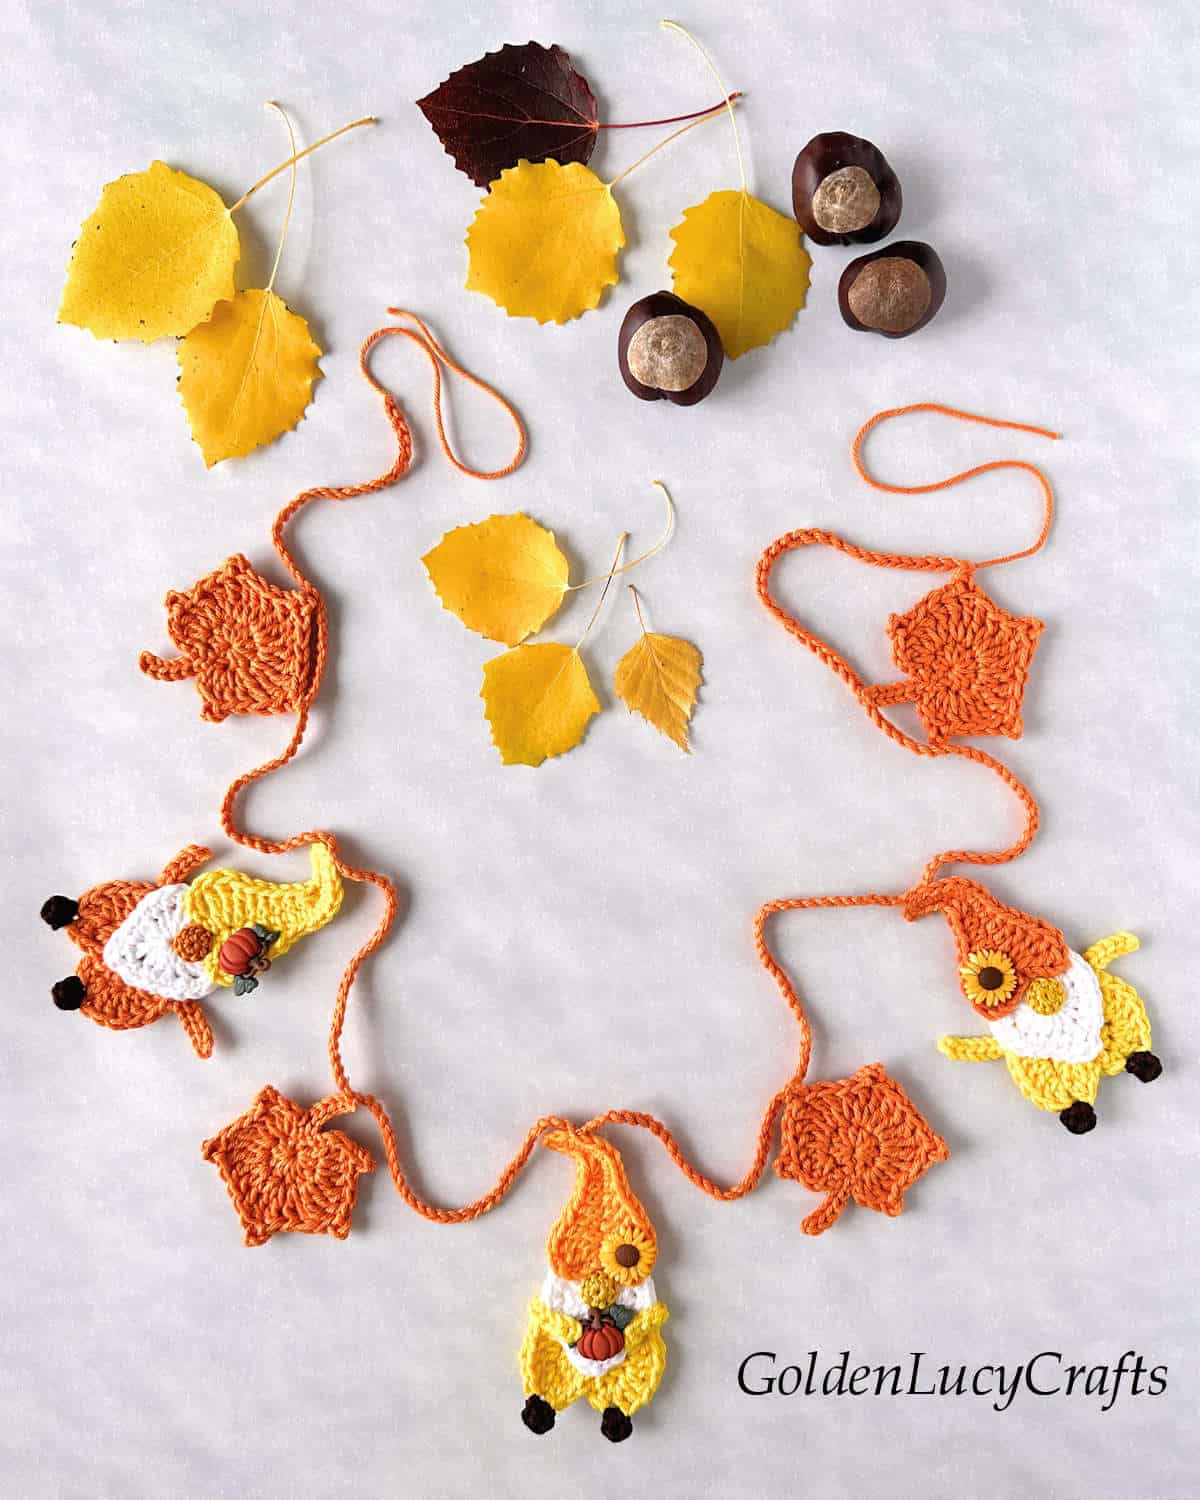 Crochet garland made of orange leaves and gnomes.